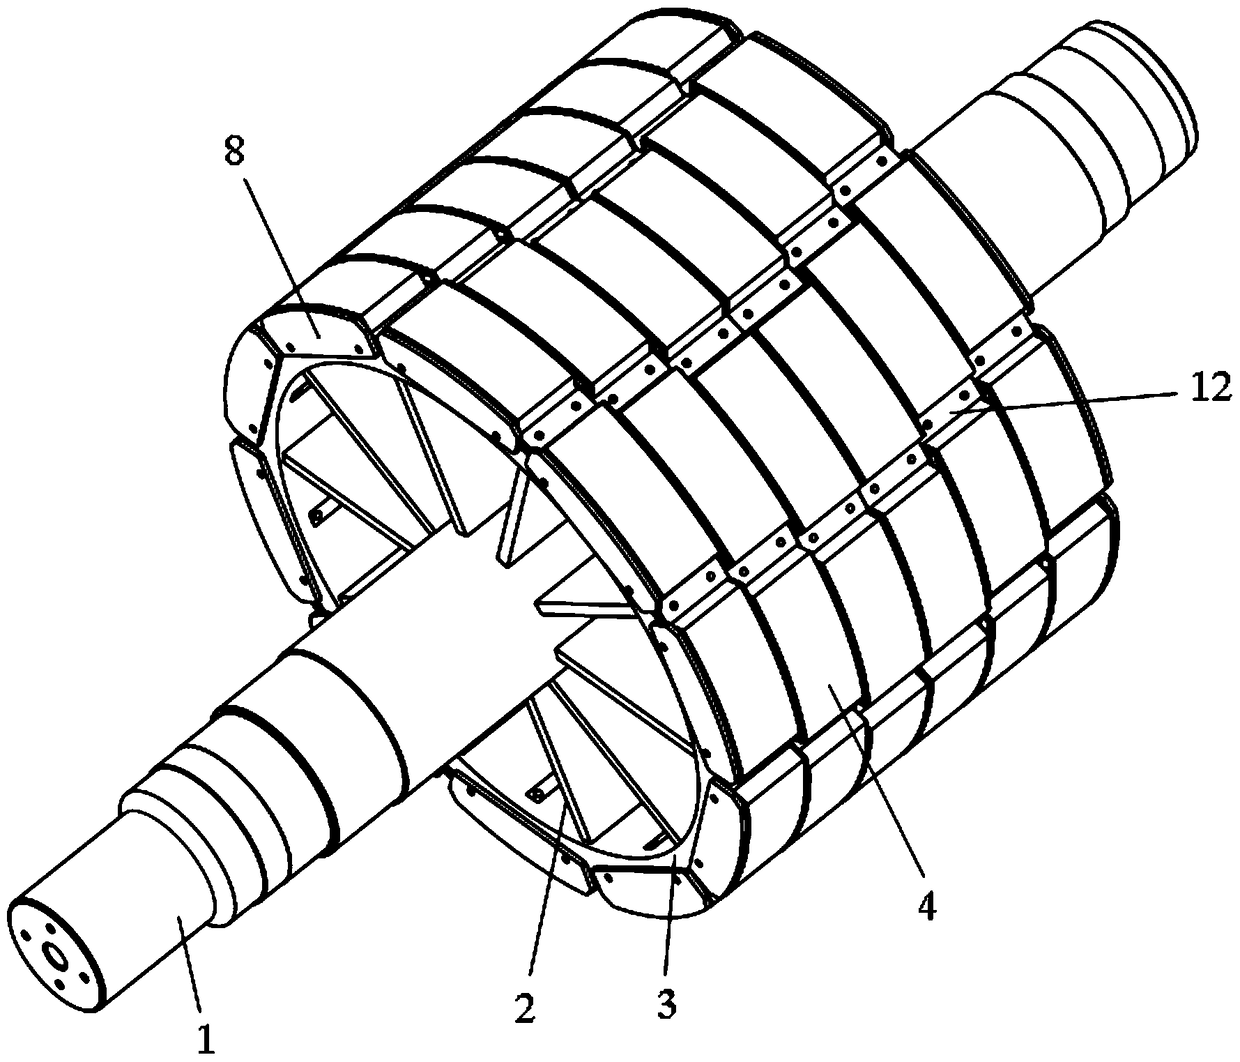 A rotor structure of a permanent magnet motor with v-shaped oblique poles